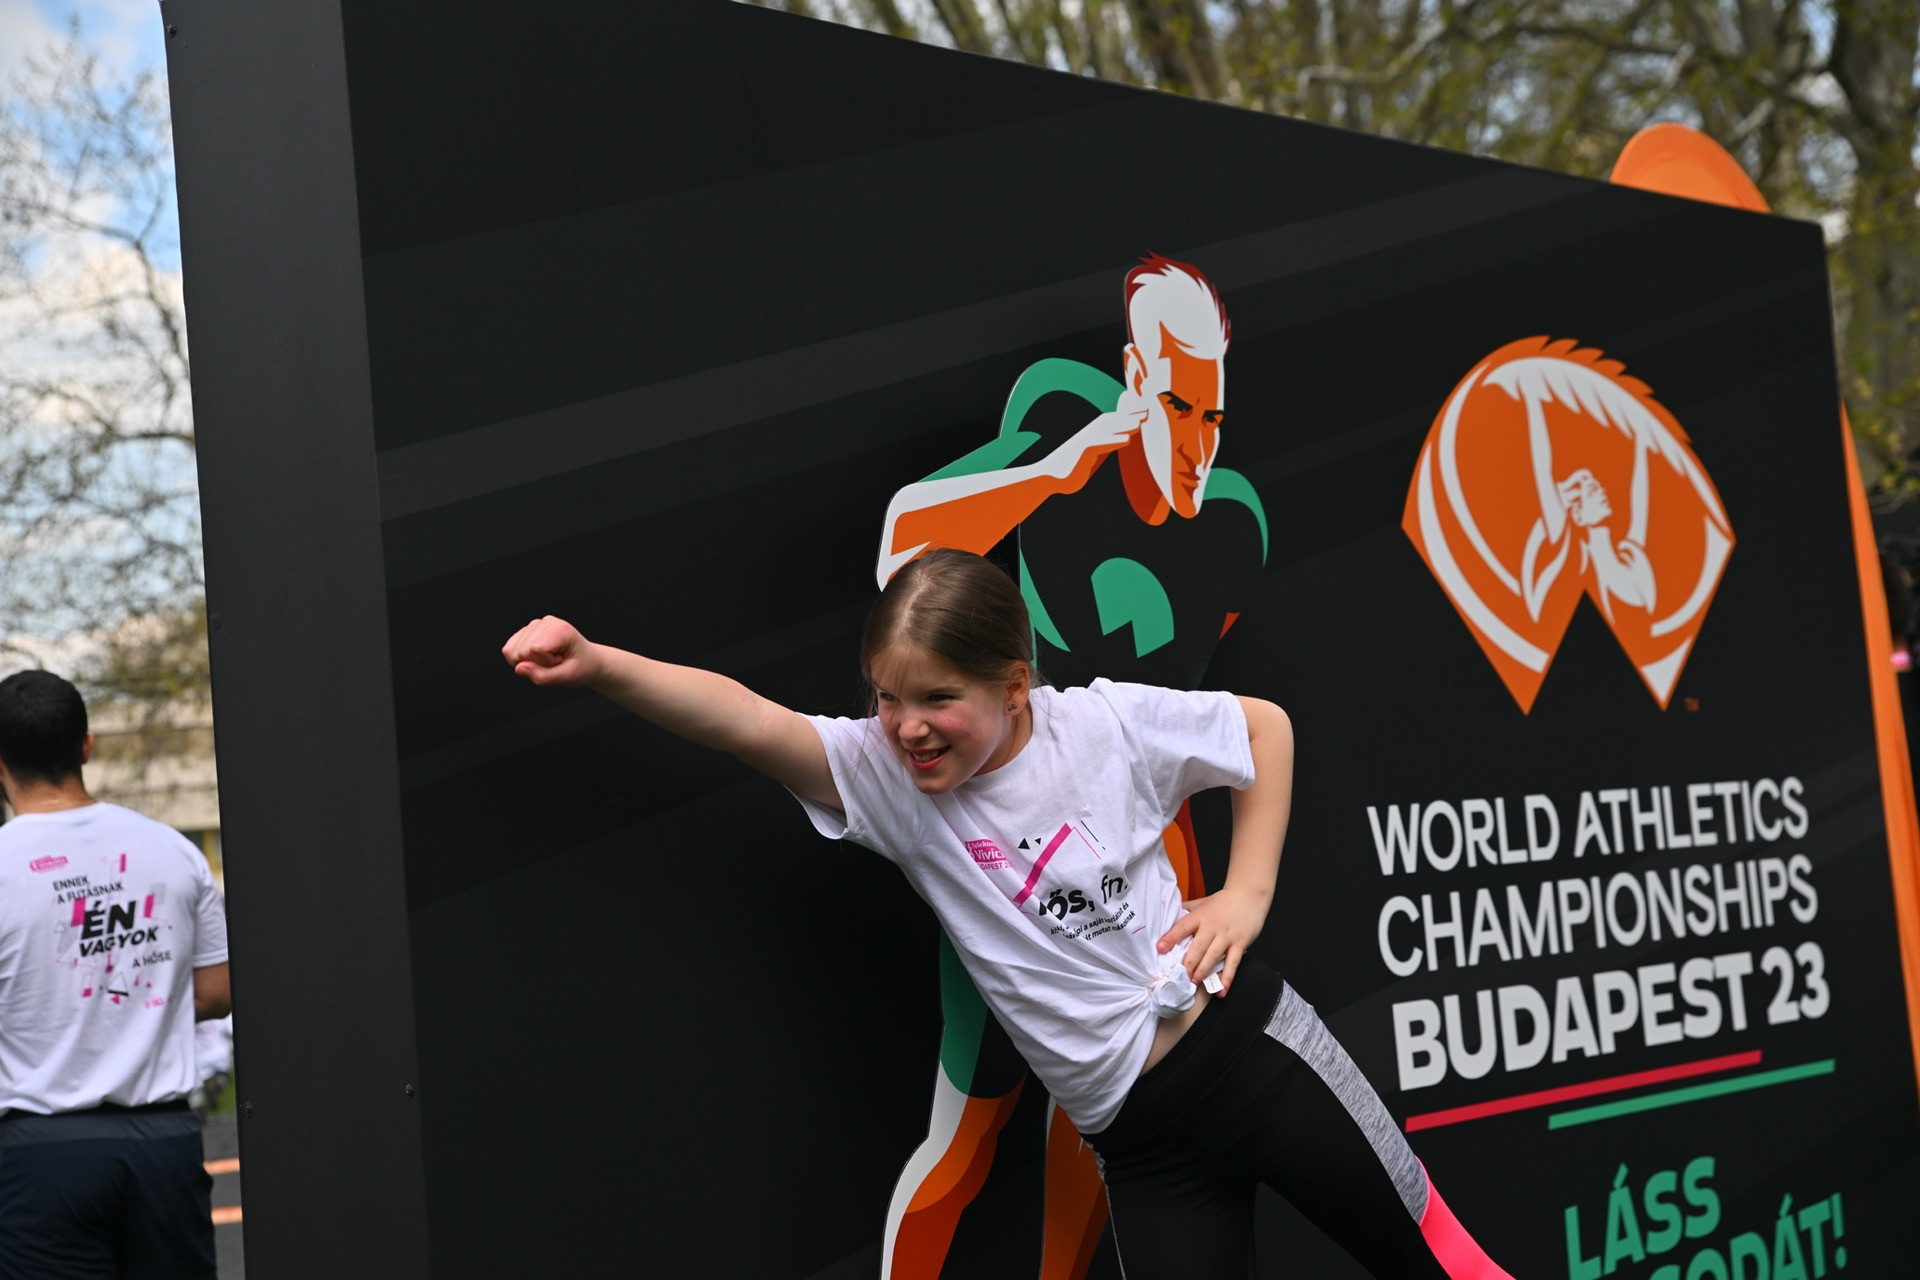 The opening of the National Athletics Centre will be accompanied by sporting events and a family day ©World Athletics